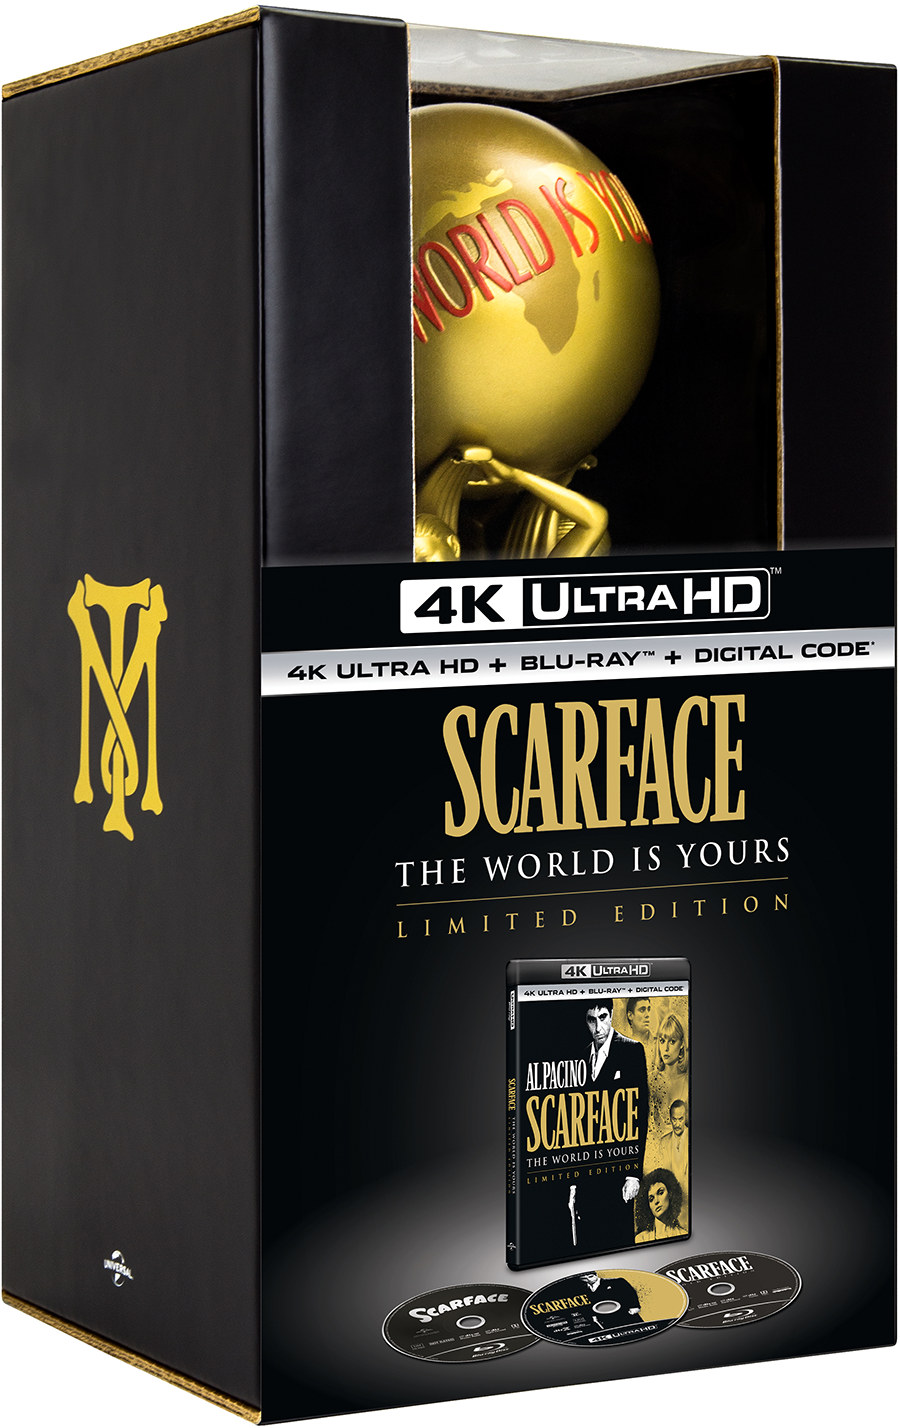 Scarface “The World is Yours” Limited Edition